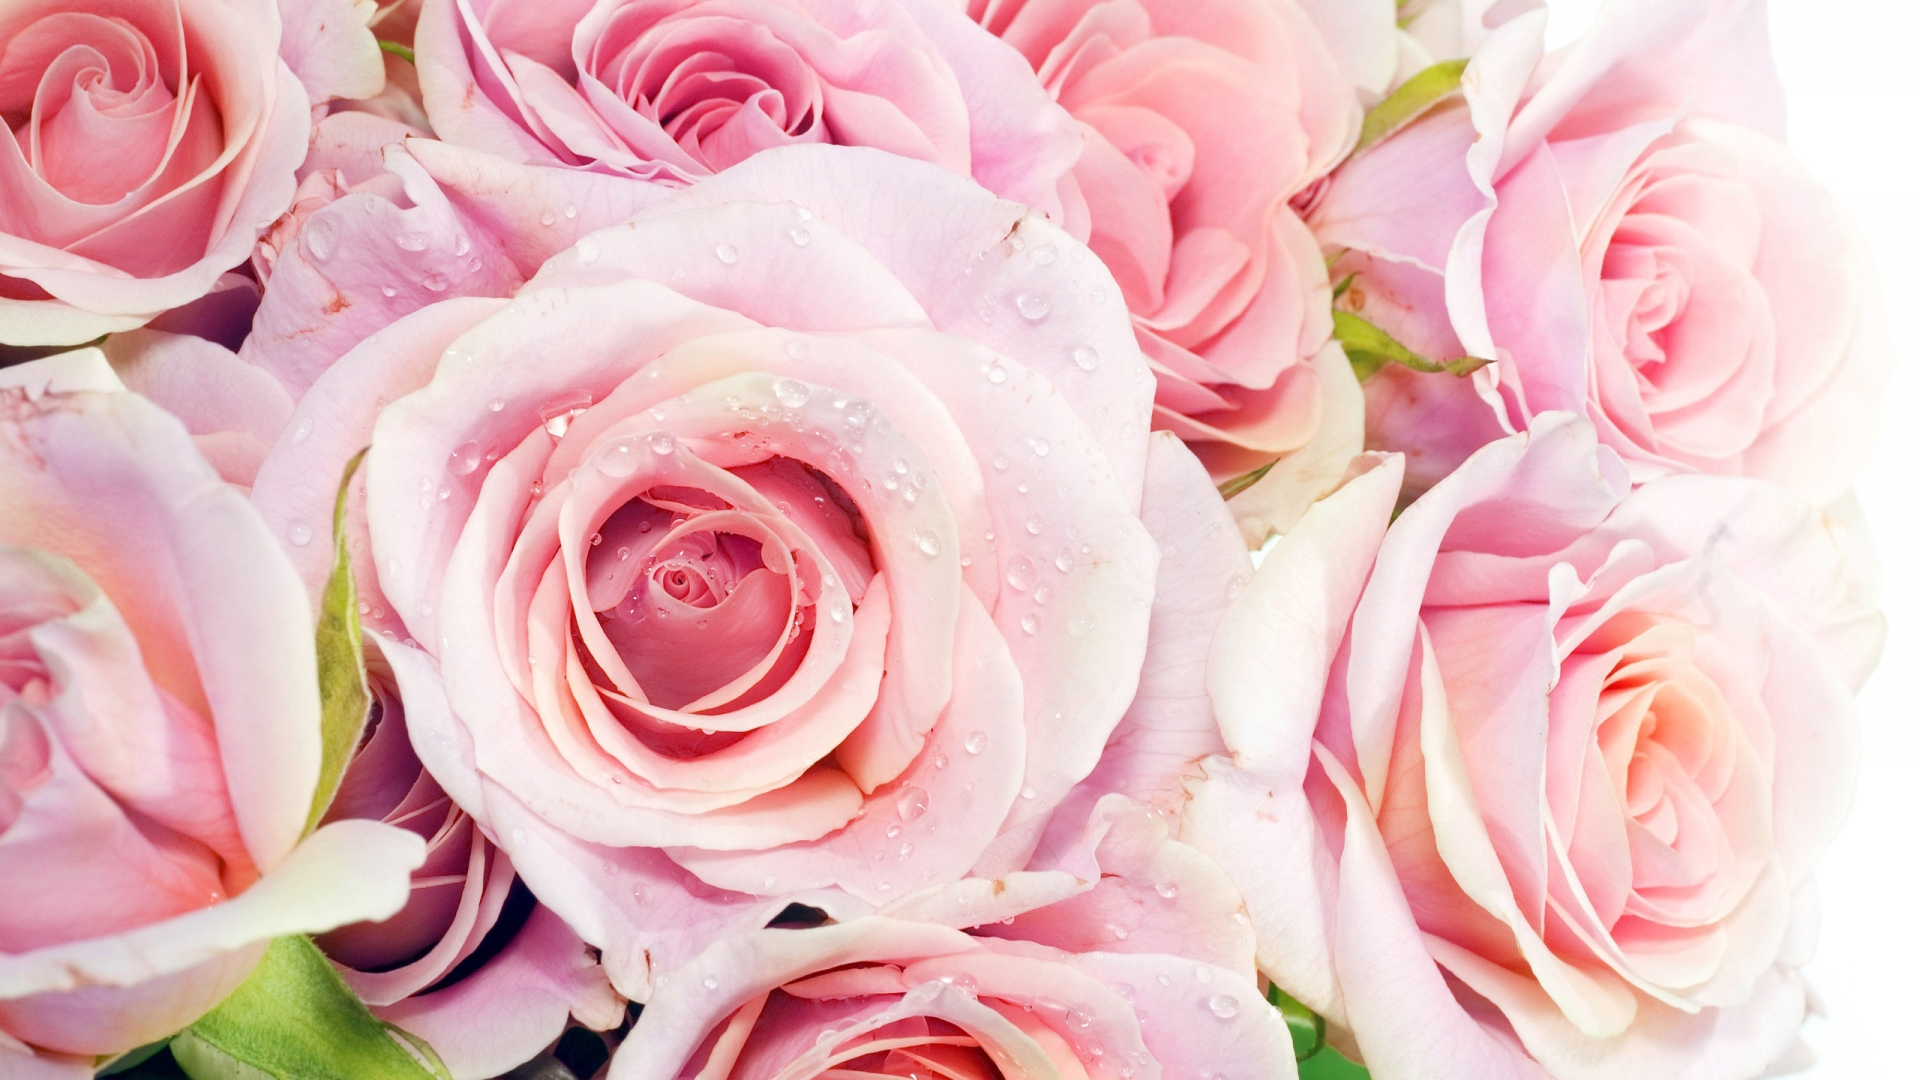 Pink Roses for 1920 x 1080 HDTV 1080p resolution